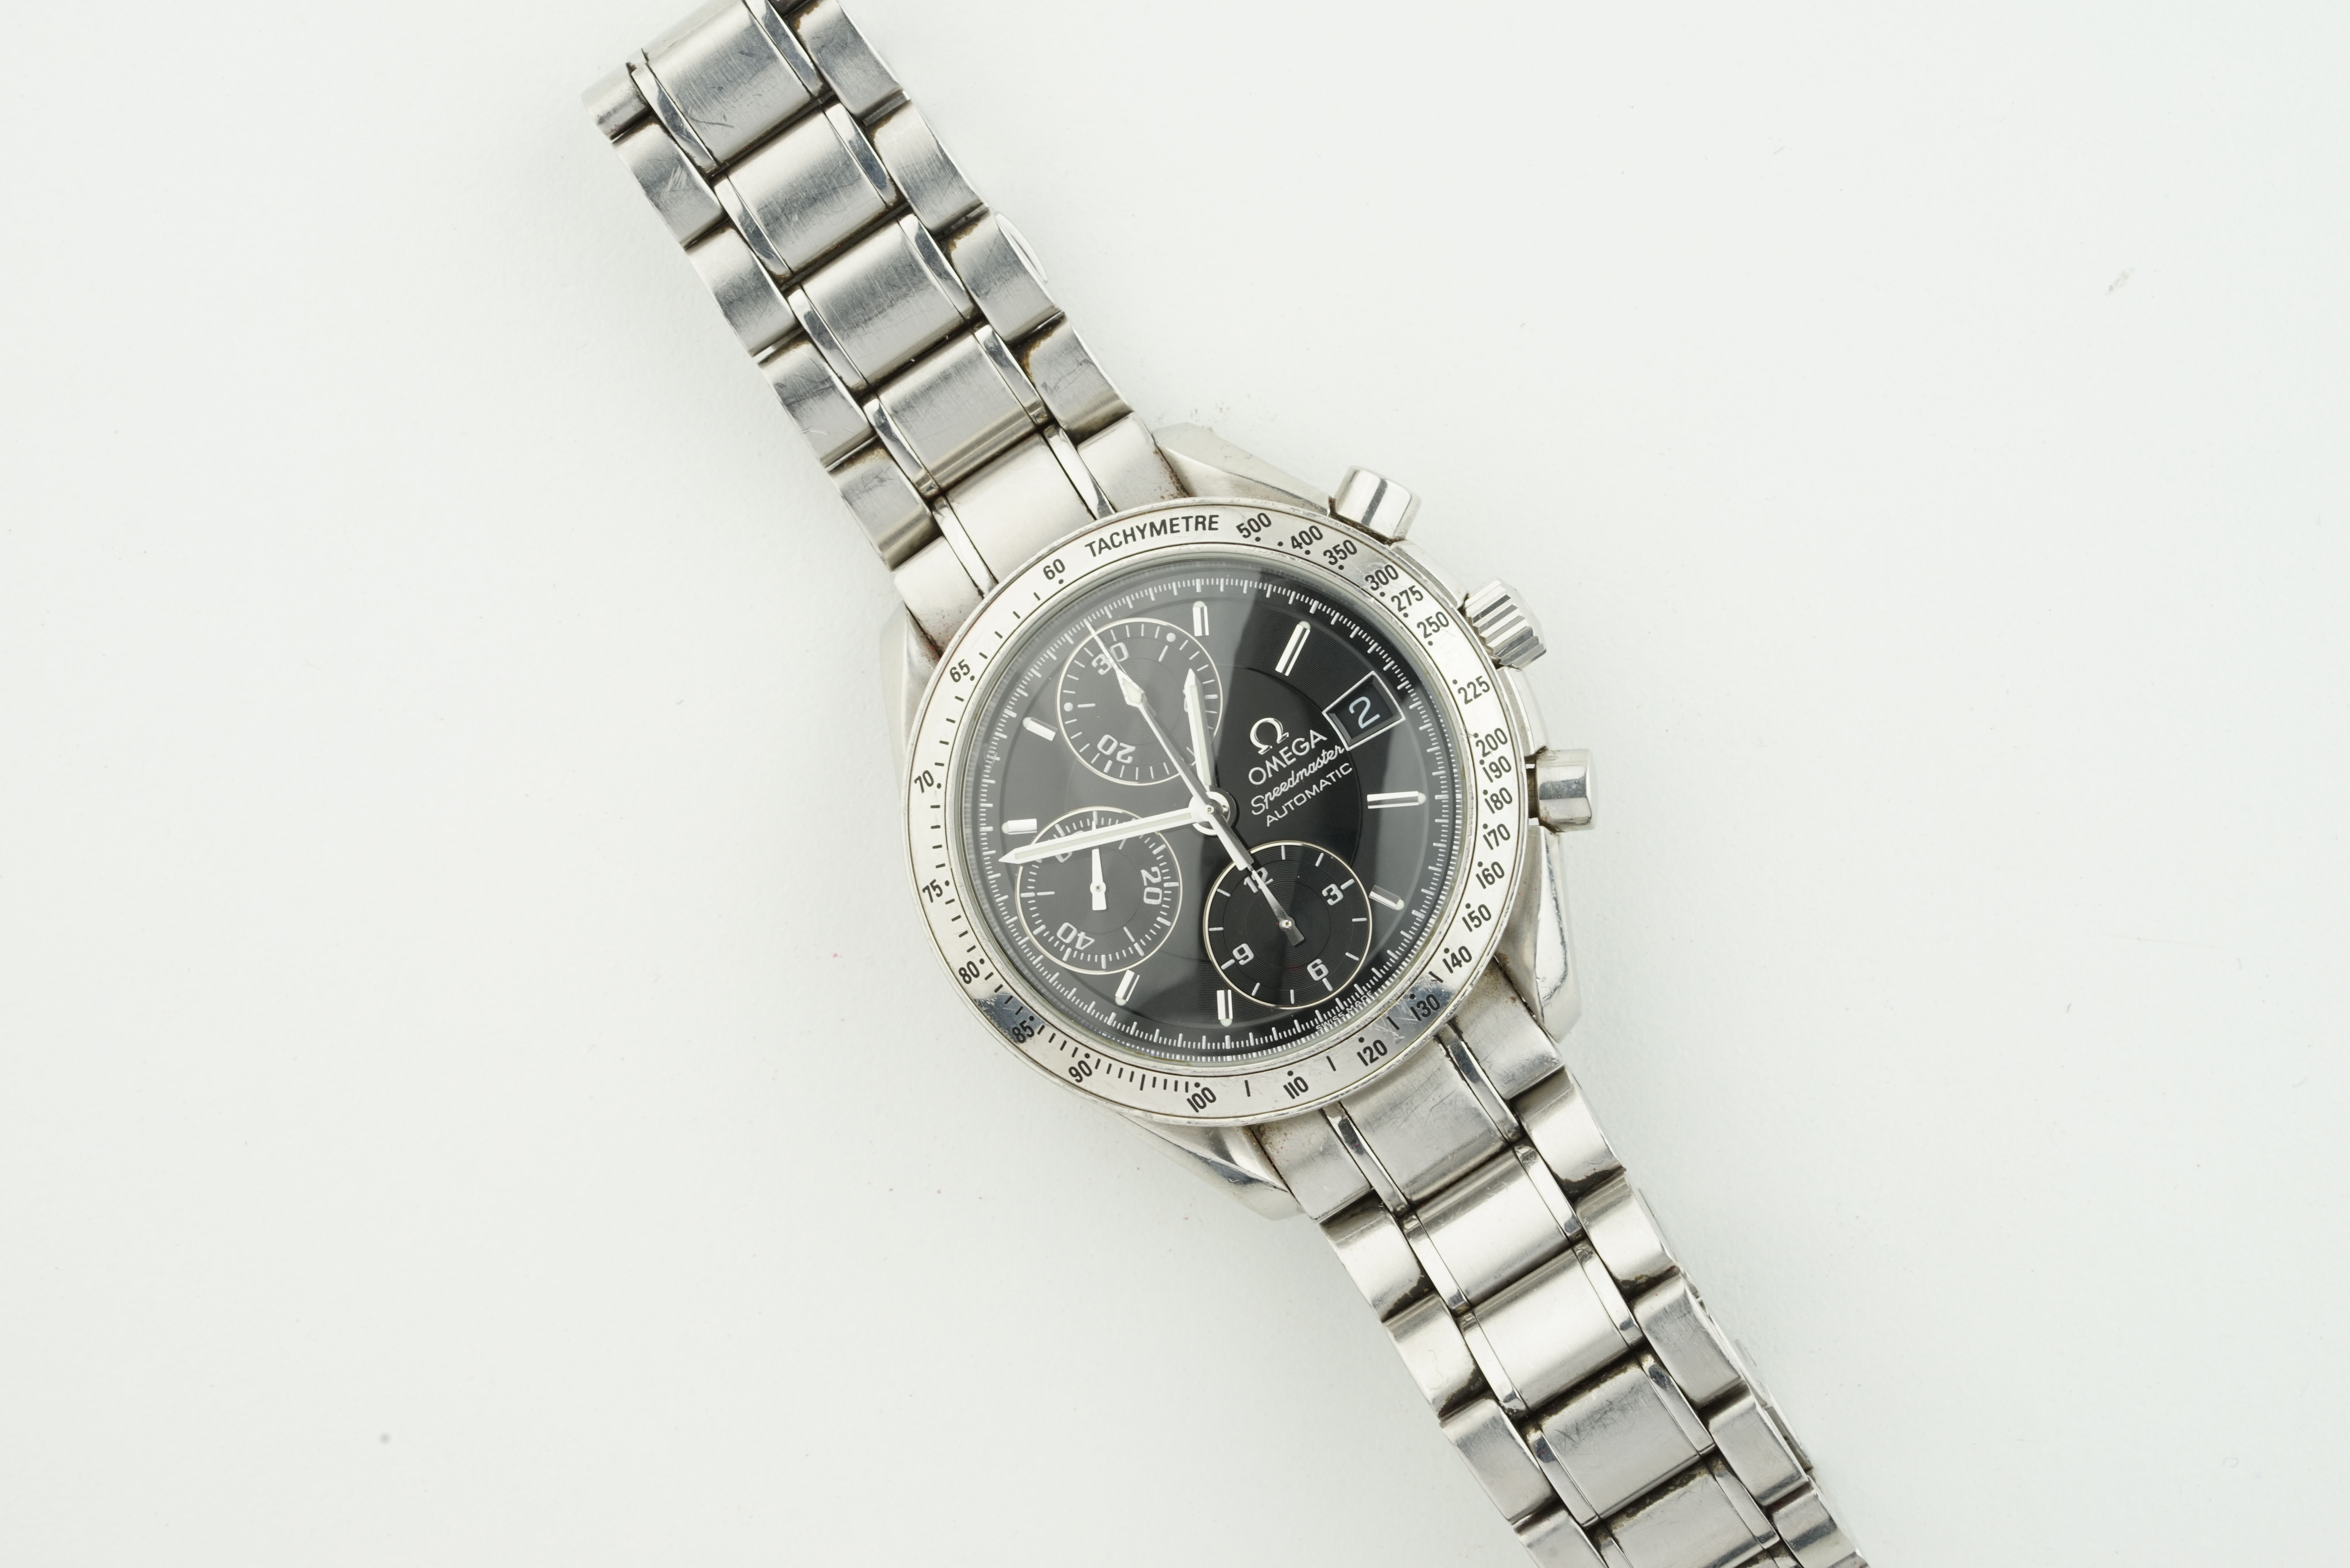 OMEGA SPEEDMASTER DATE W/ GUARANTEE CARD, circular black dial with hour markers and hands, 39mm - Image 2 of 3